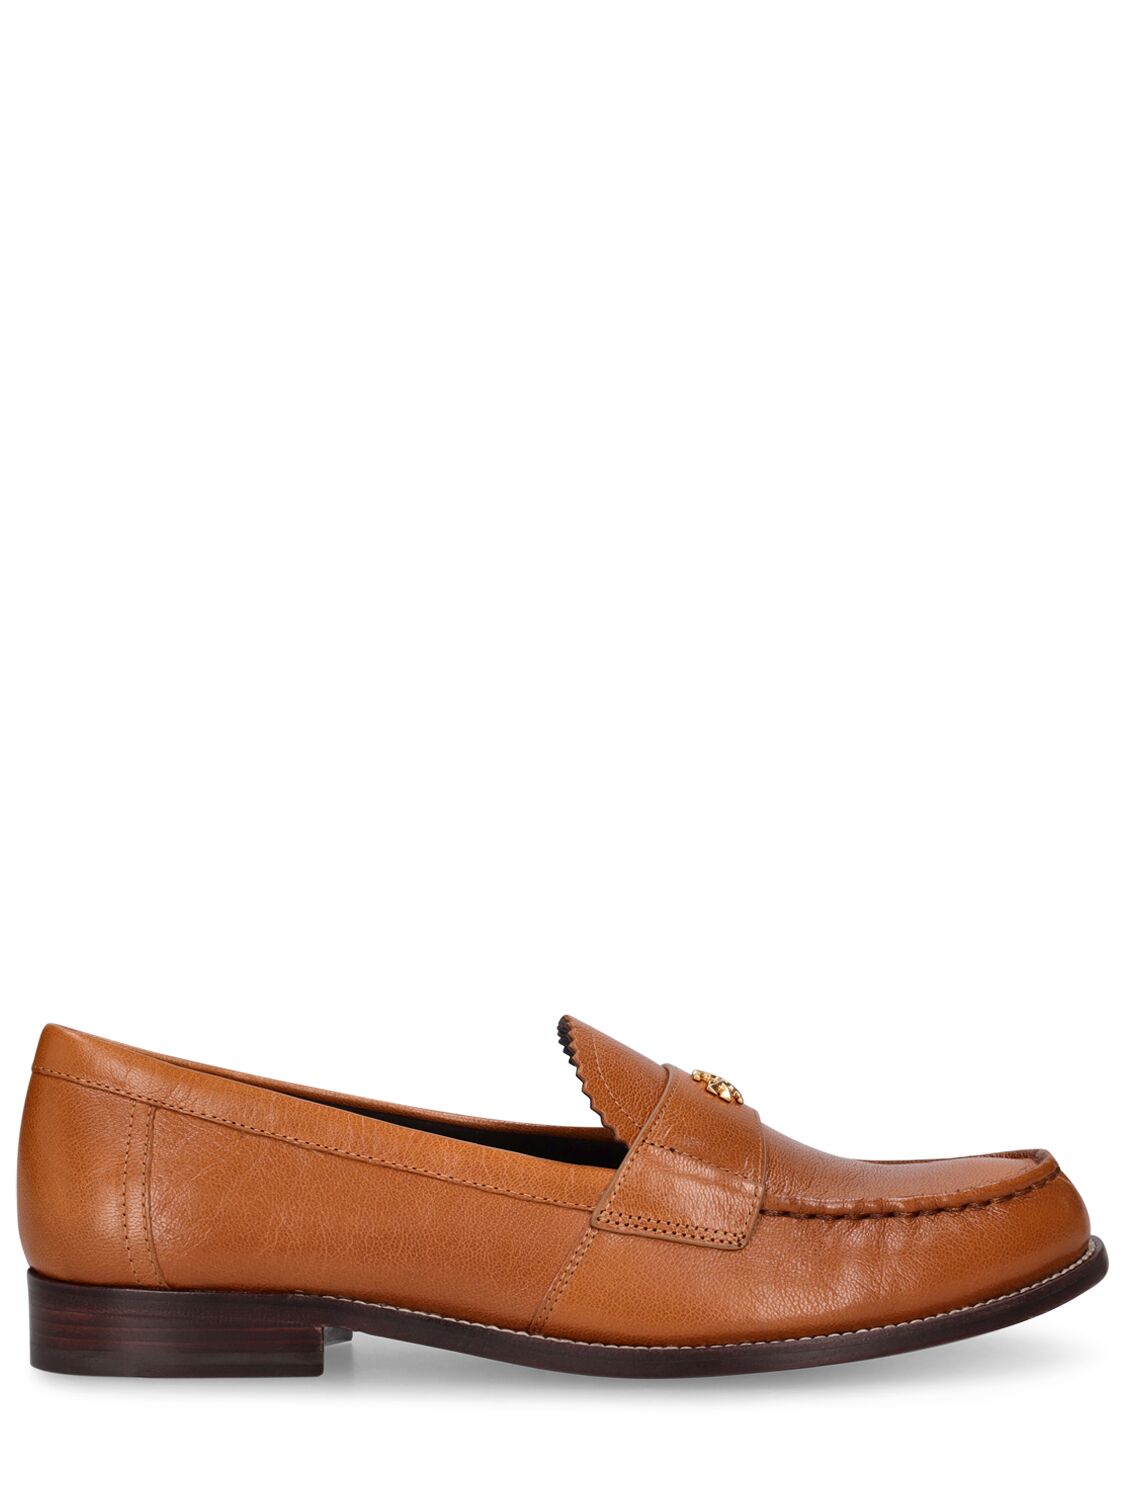 Mm Perry Leather Loafers - TORY BURCH - Modalova